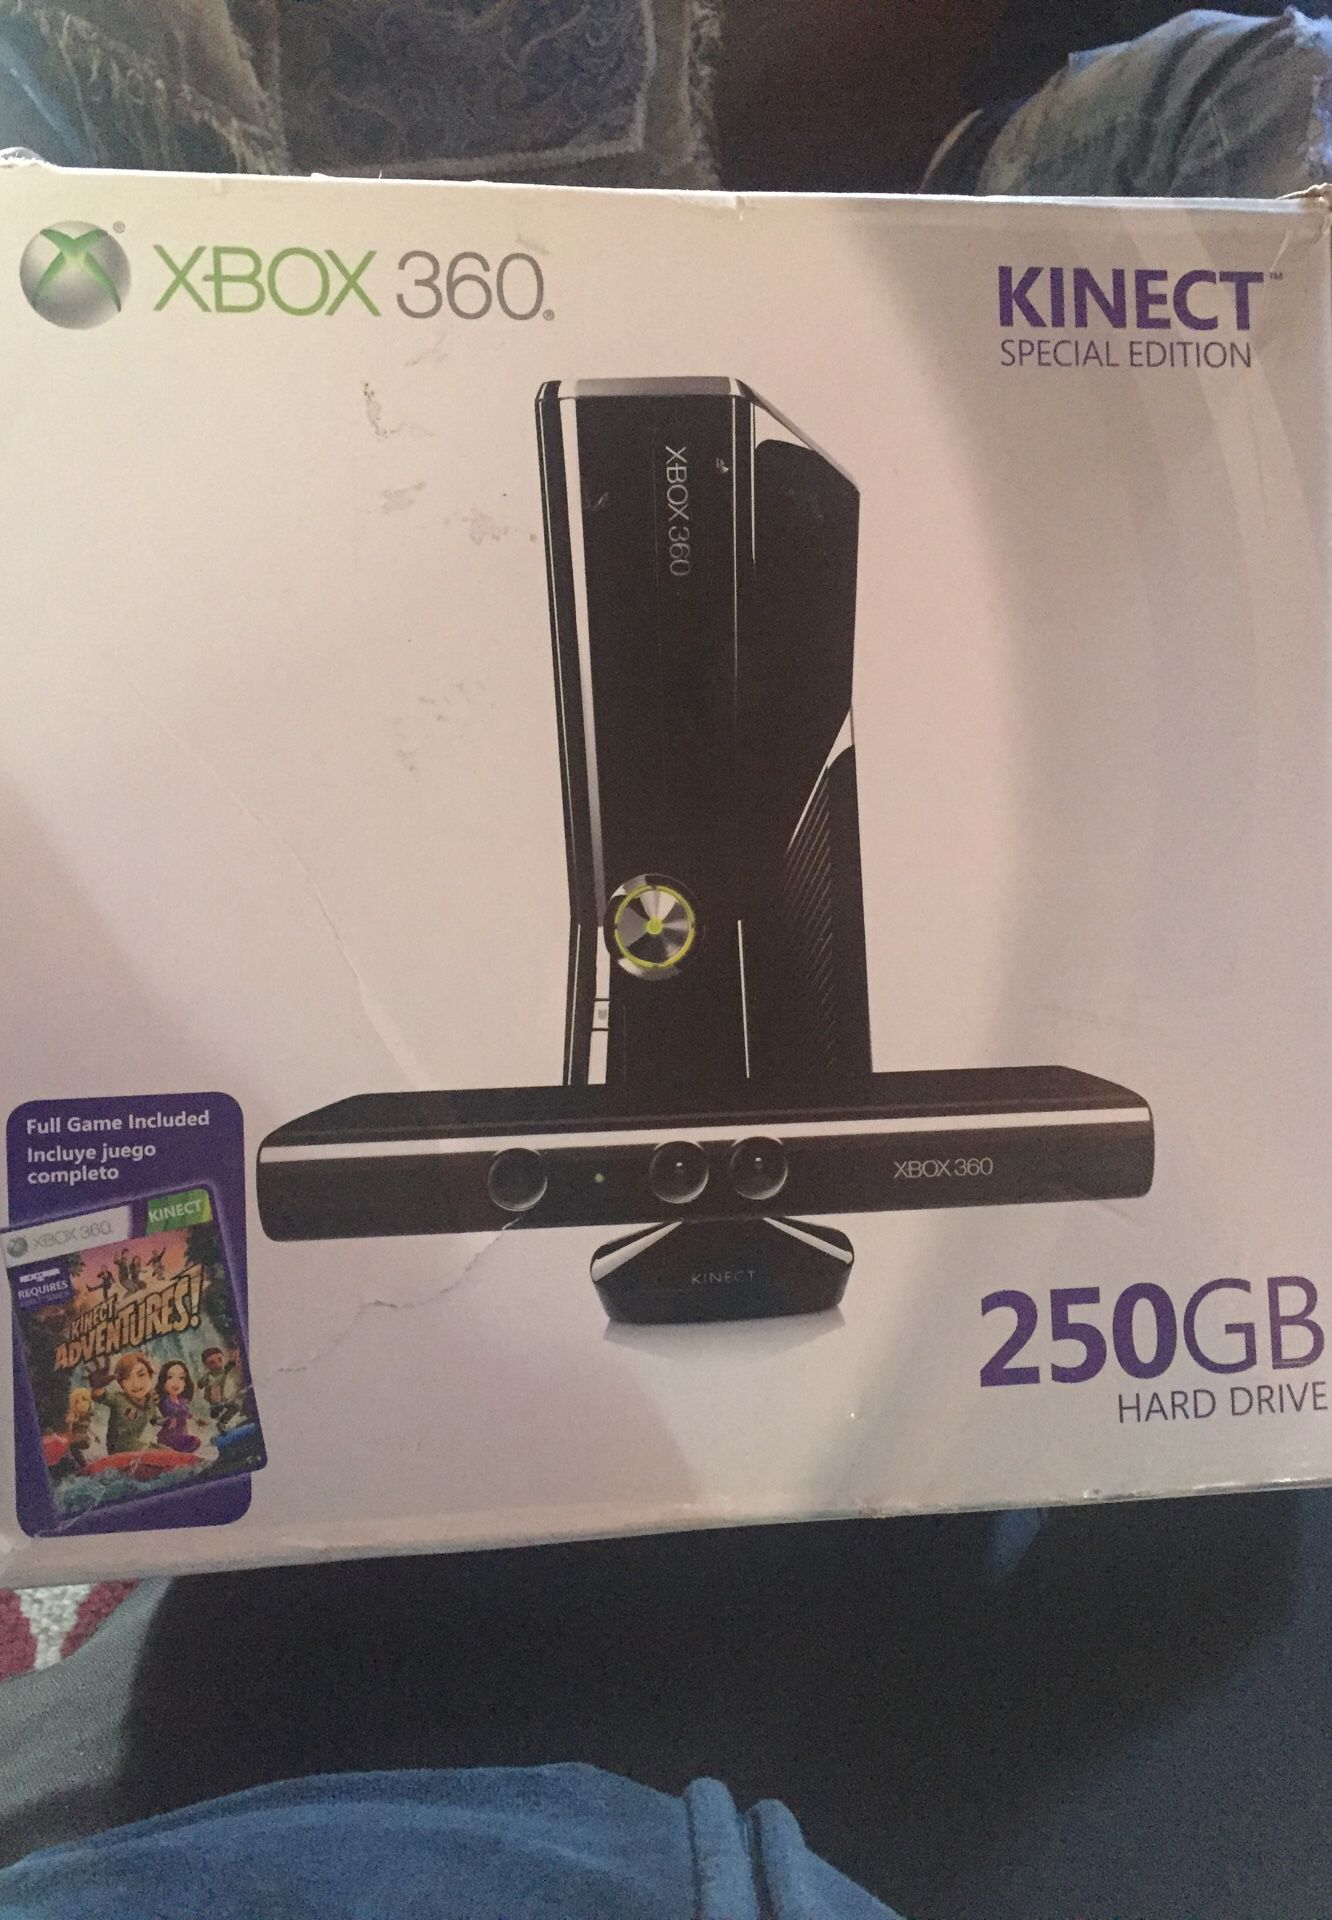 X box 360 Kinect Special Edition 250 Hard Drive ,Brand New